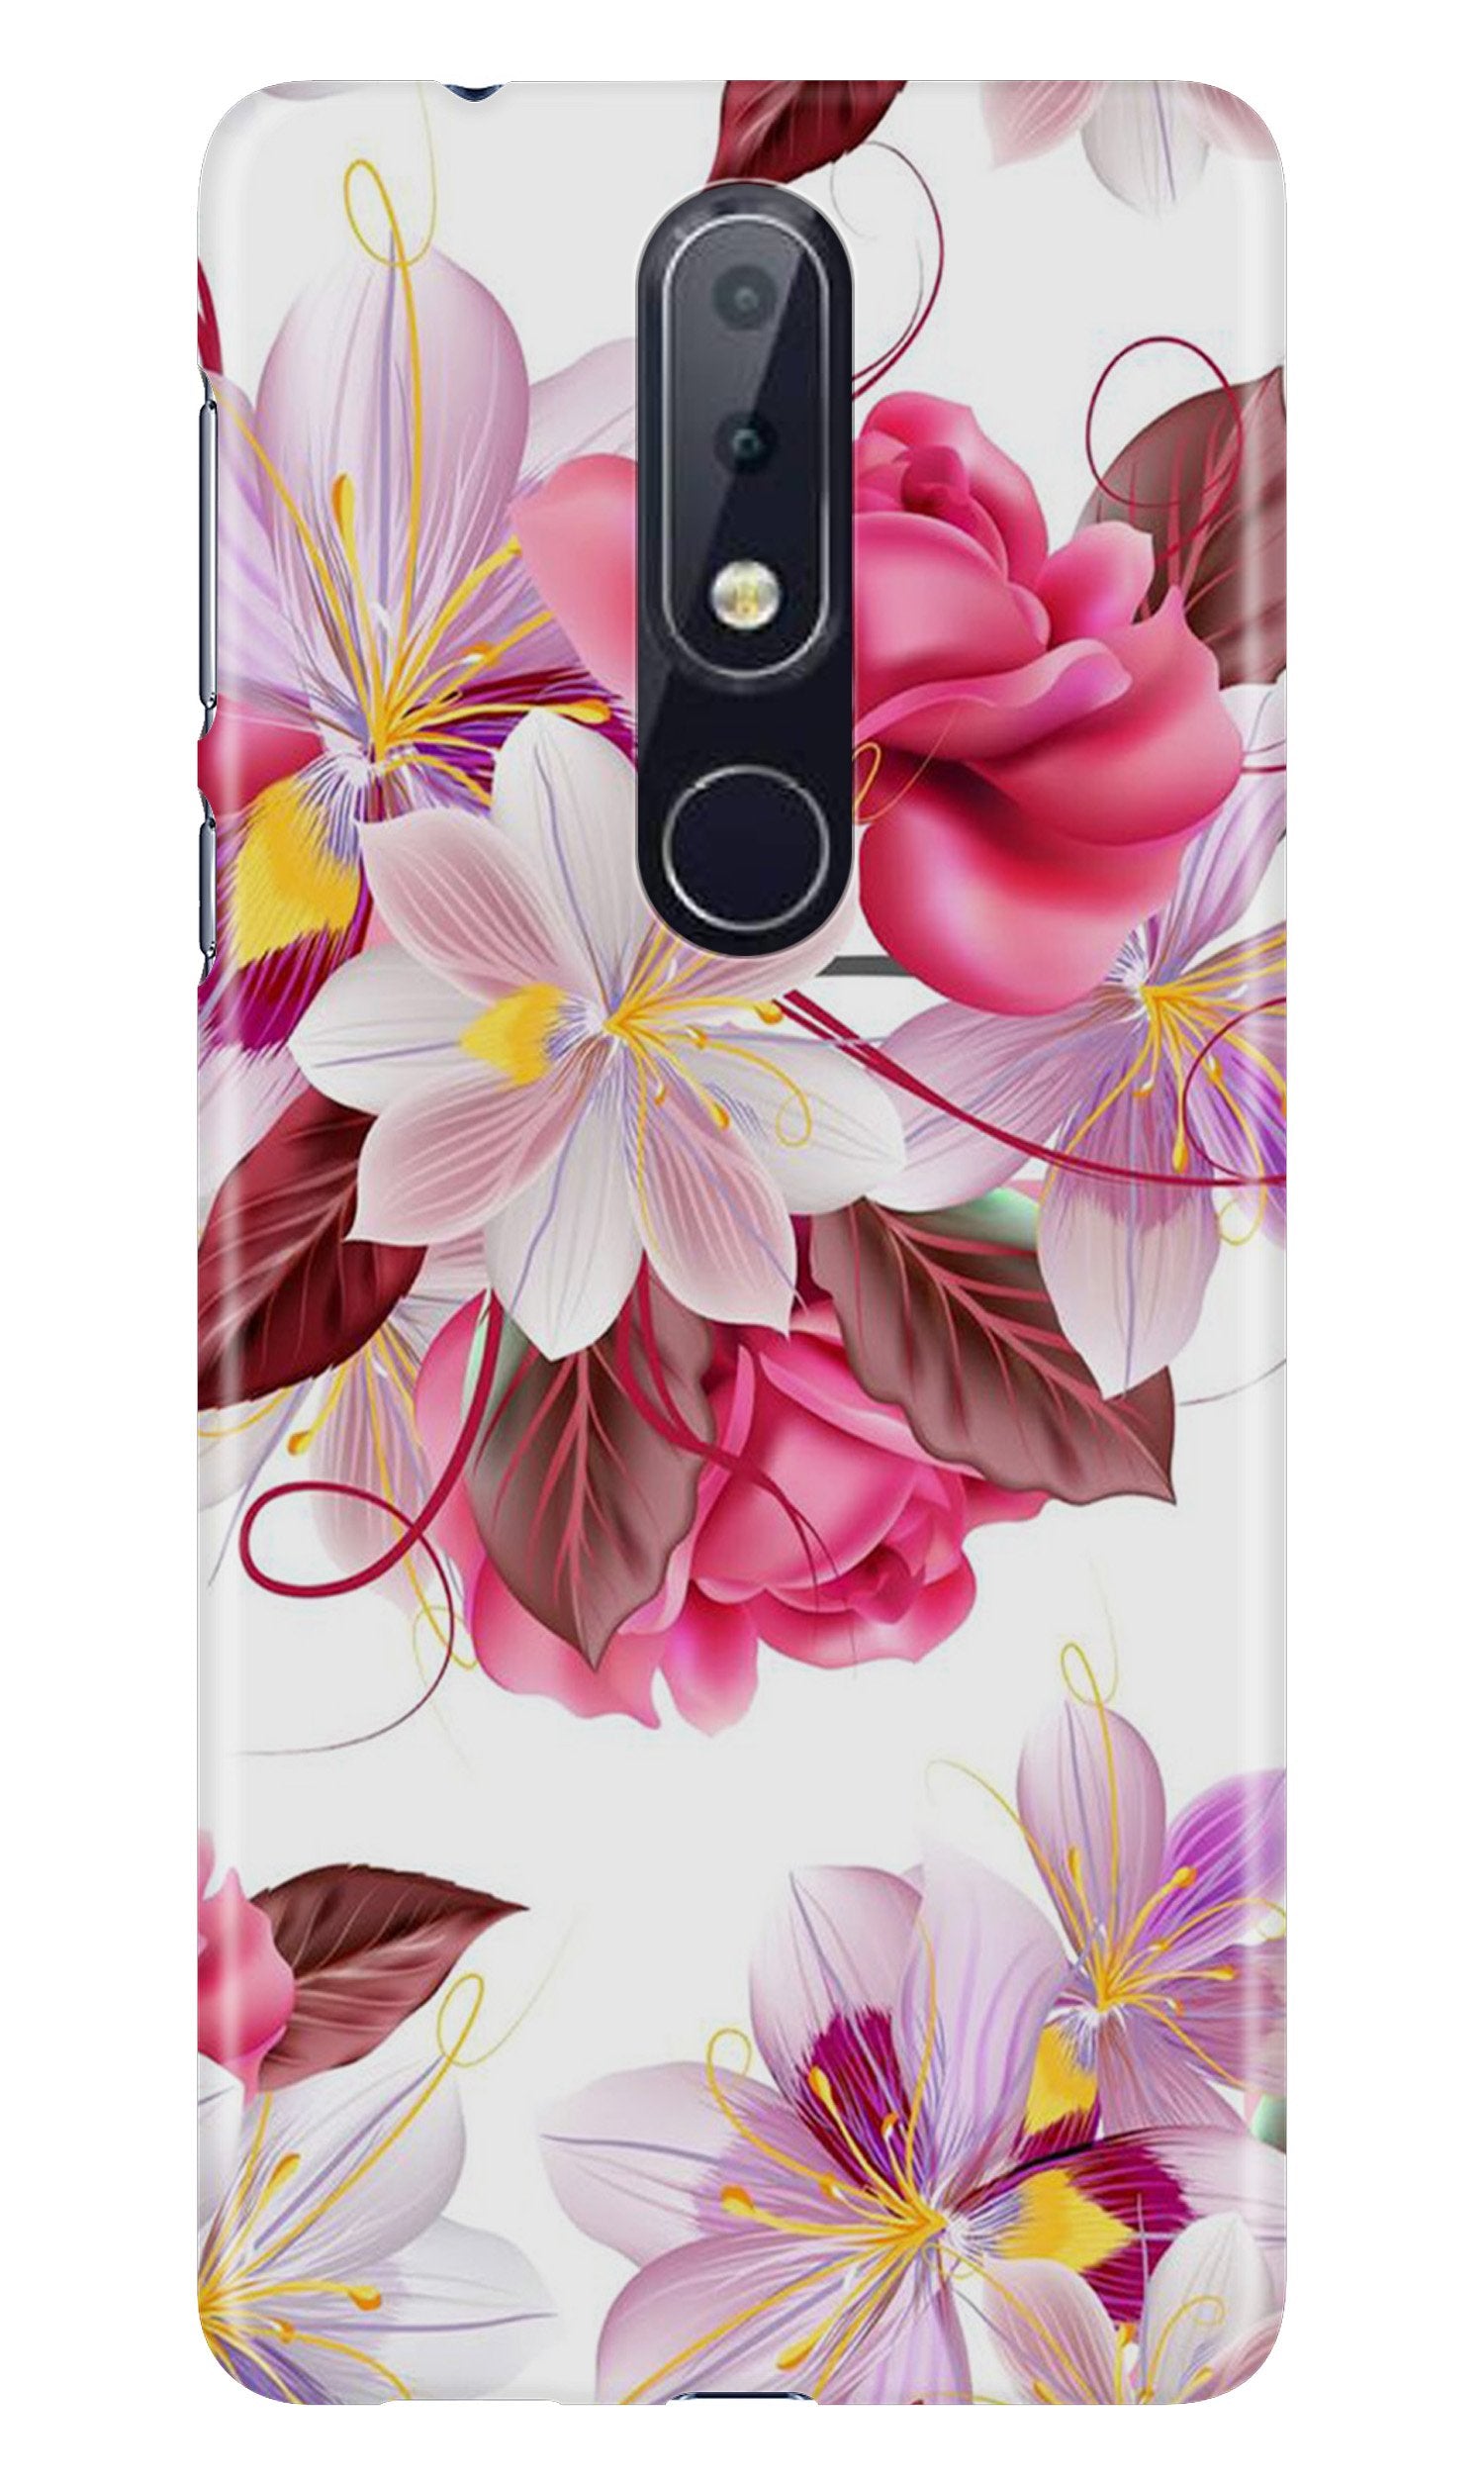 Beautiful flowers Case for Nokia 7.1